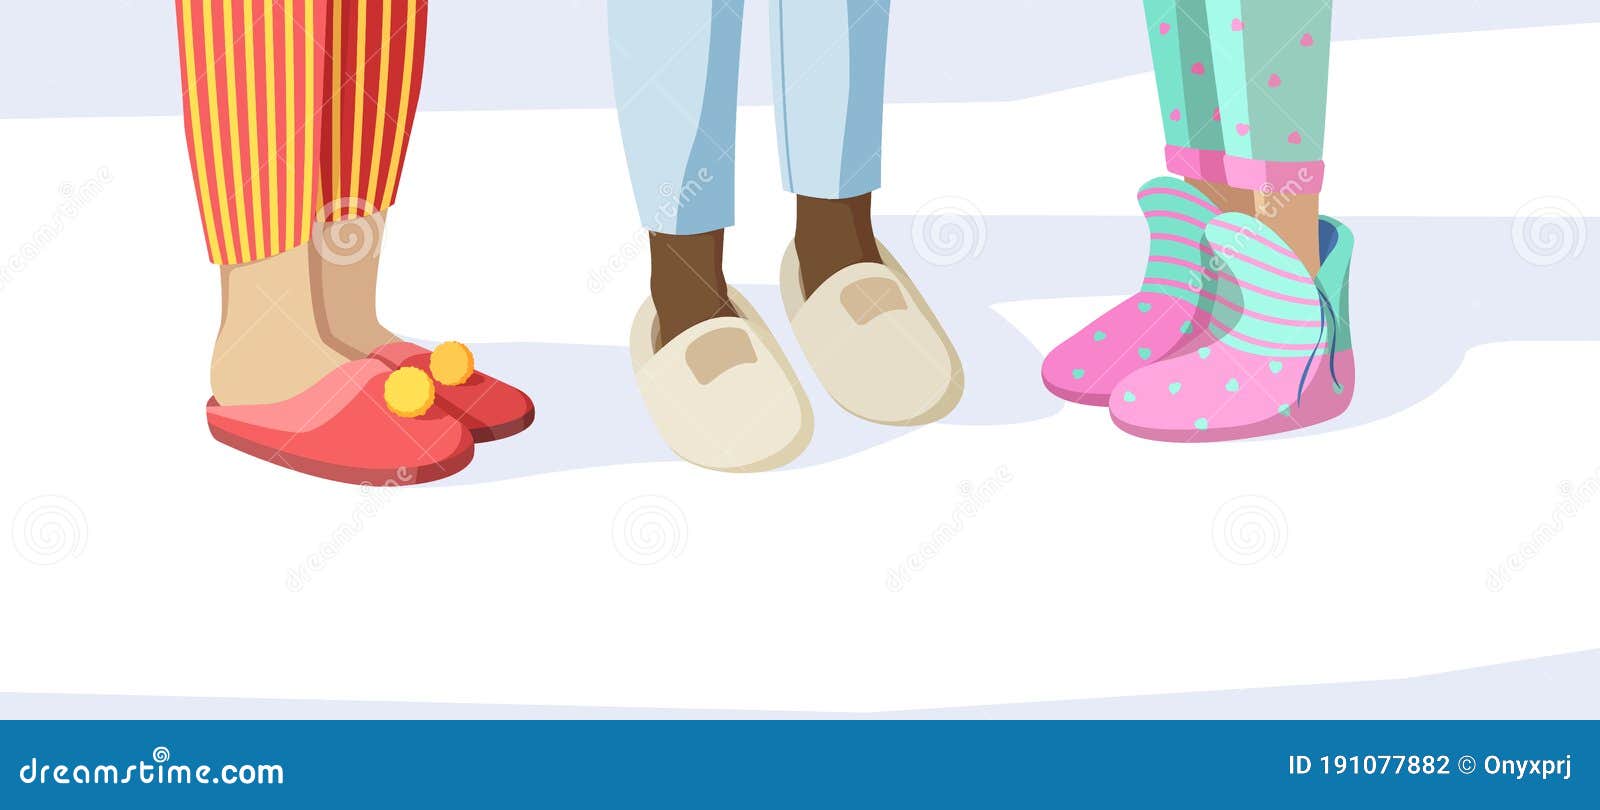 Legs in Slippers. Pajama Party Concept Kids in Night Clothes Textile ...